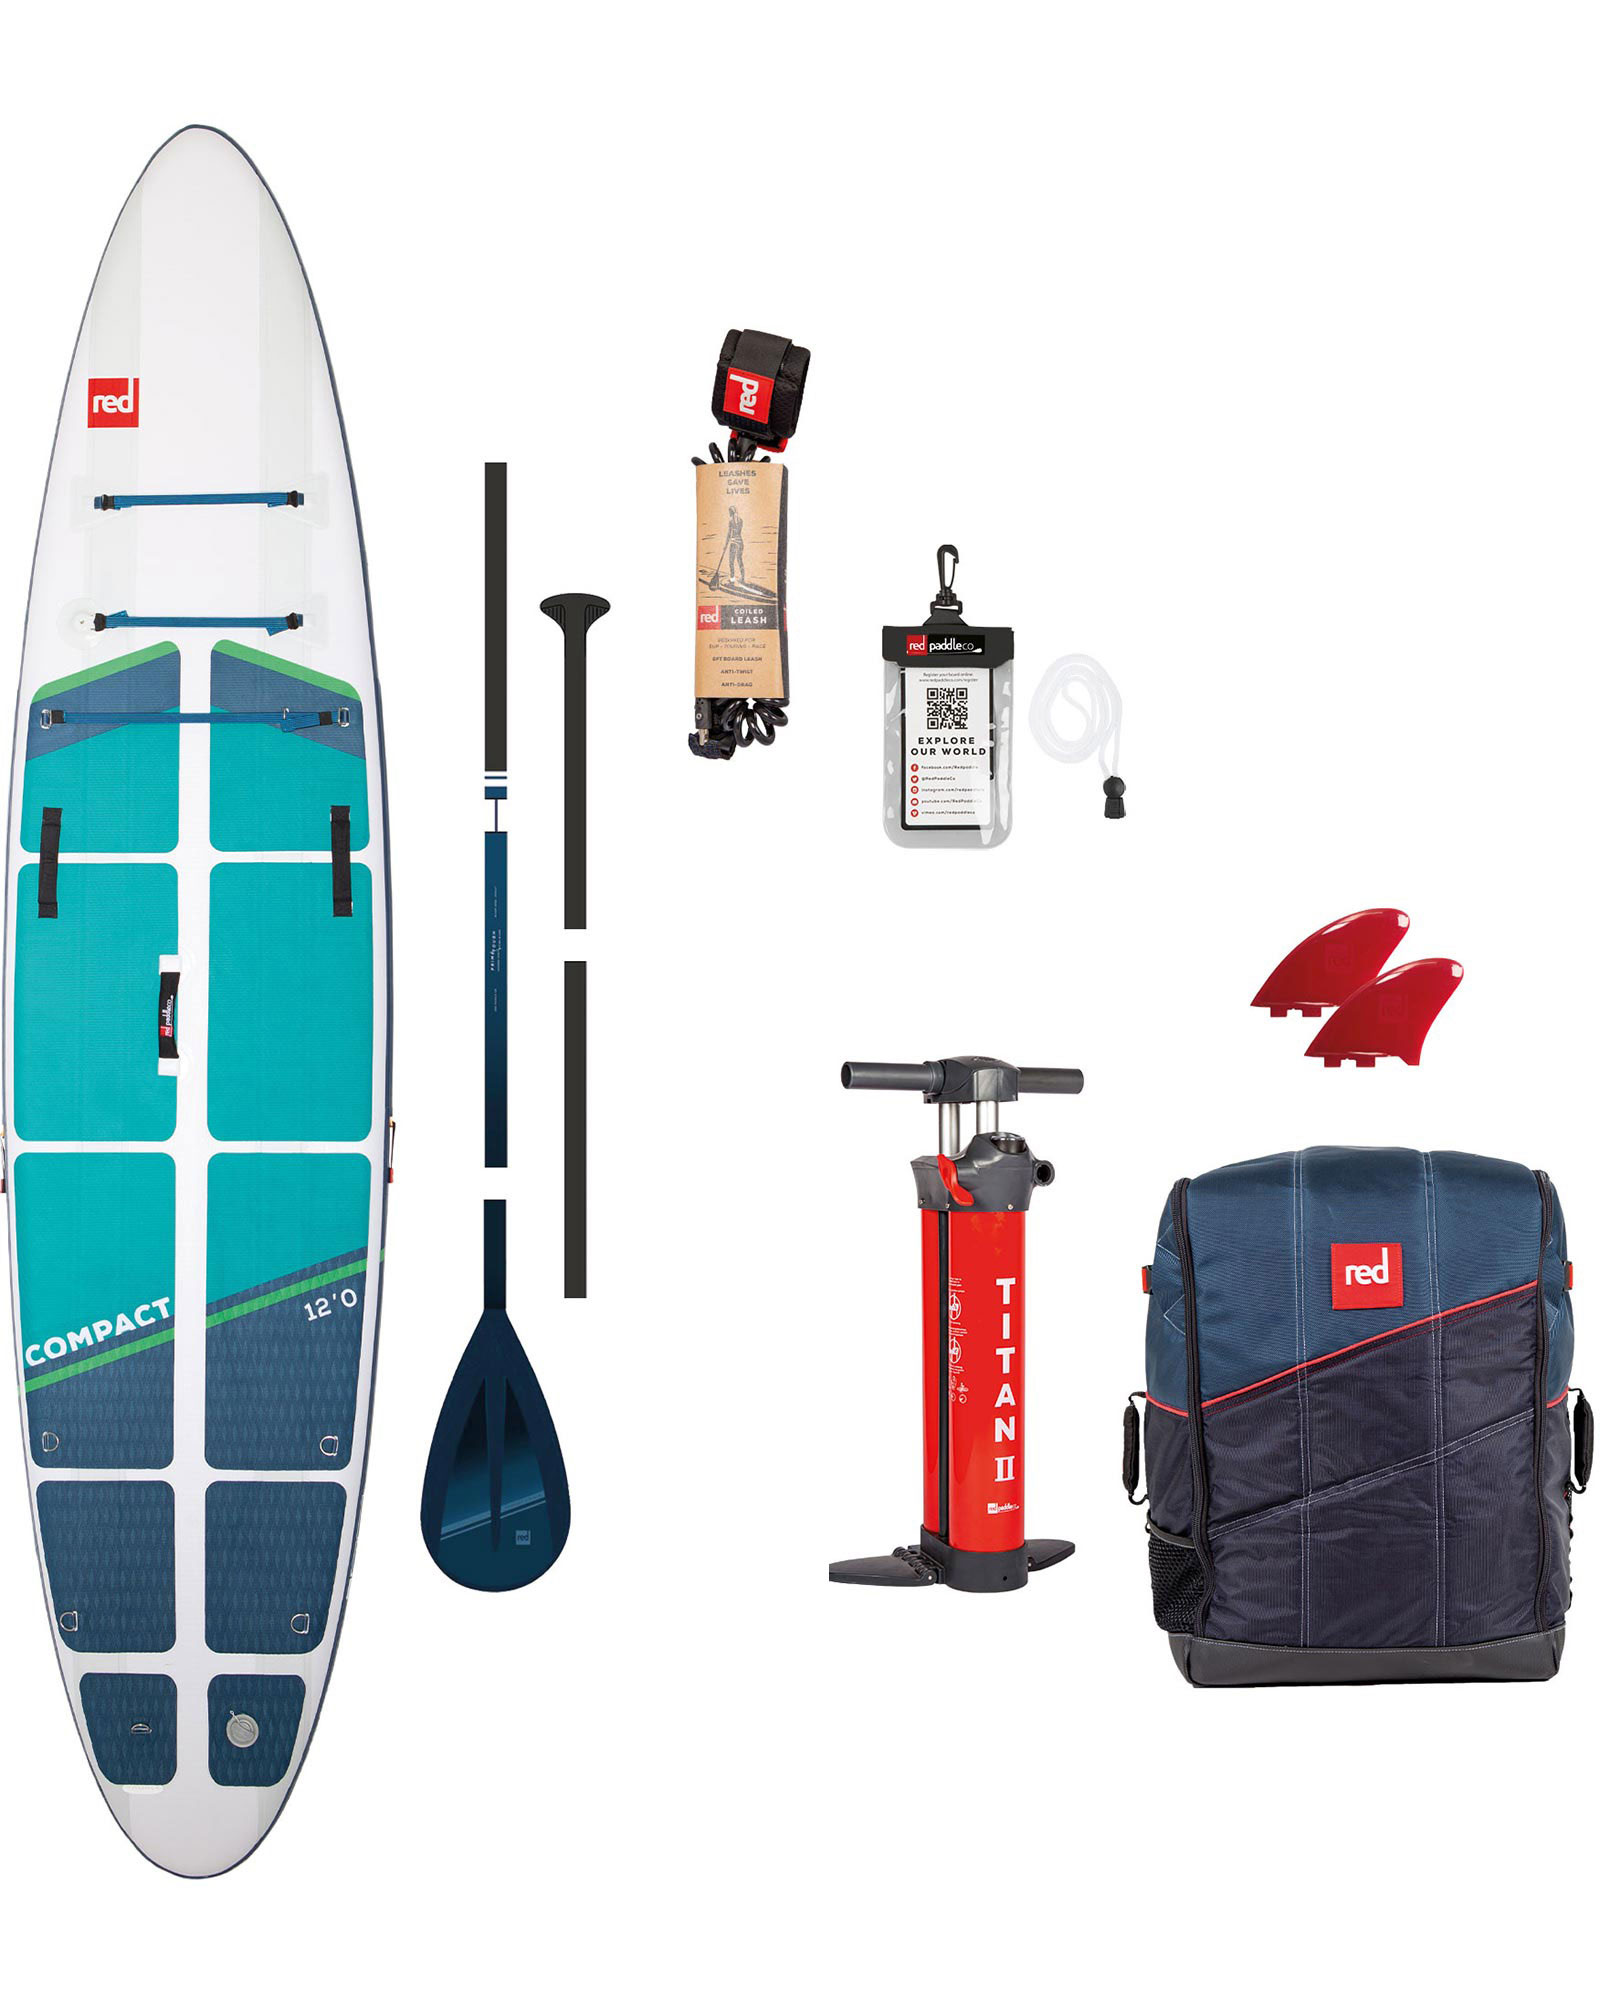 Red 12.0 - Compact Inflatable Paddleboard Package 22